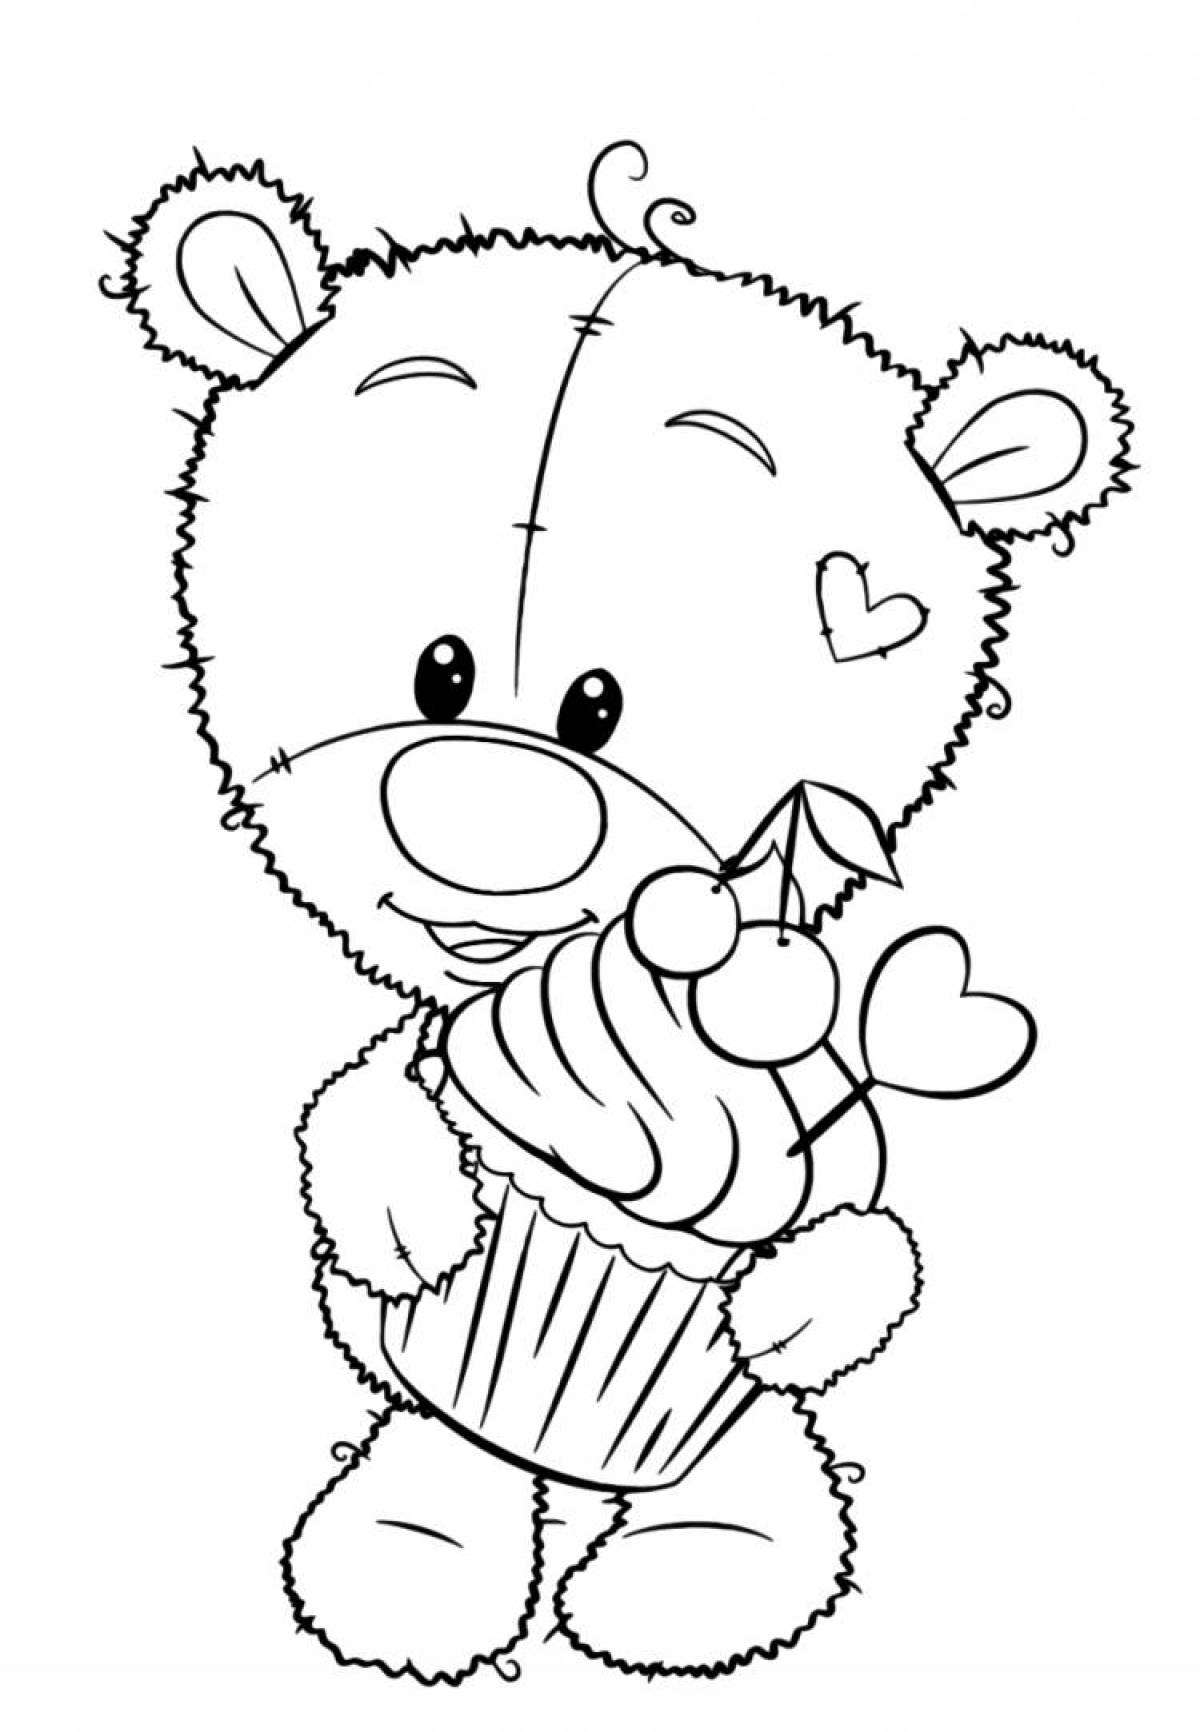 Coloring page jumping teddy bear